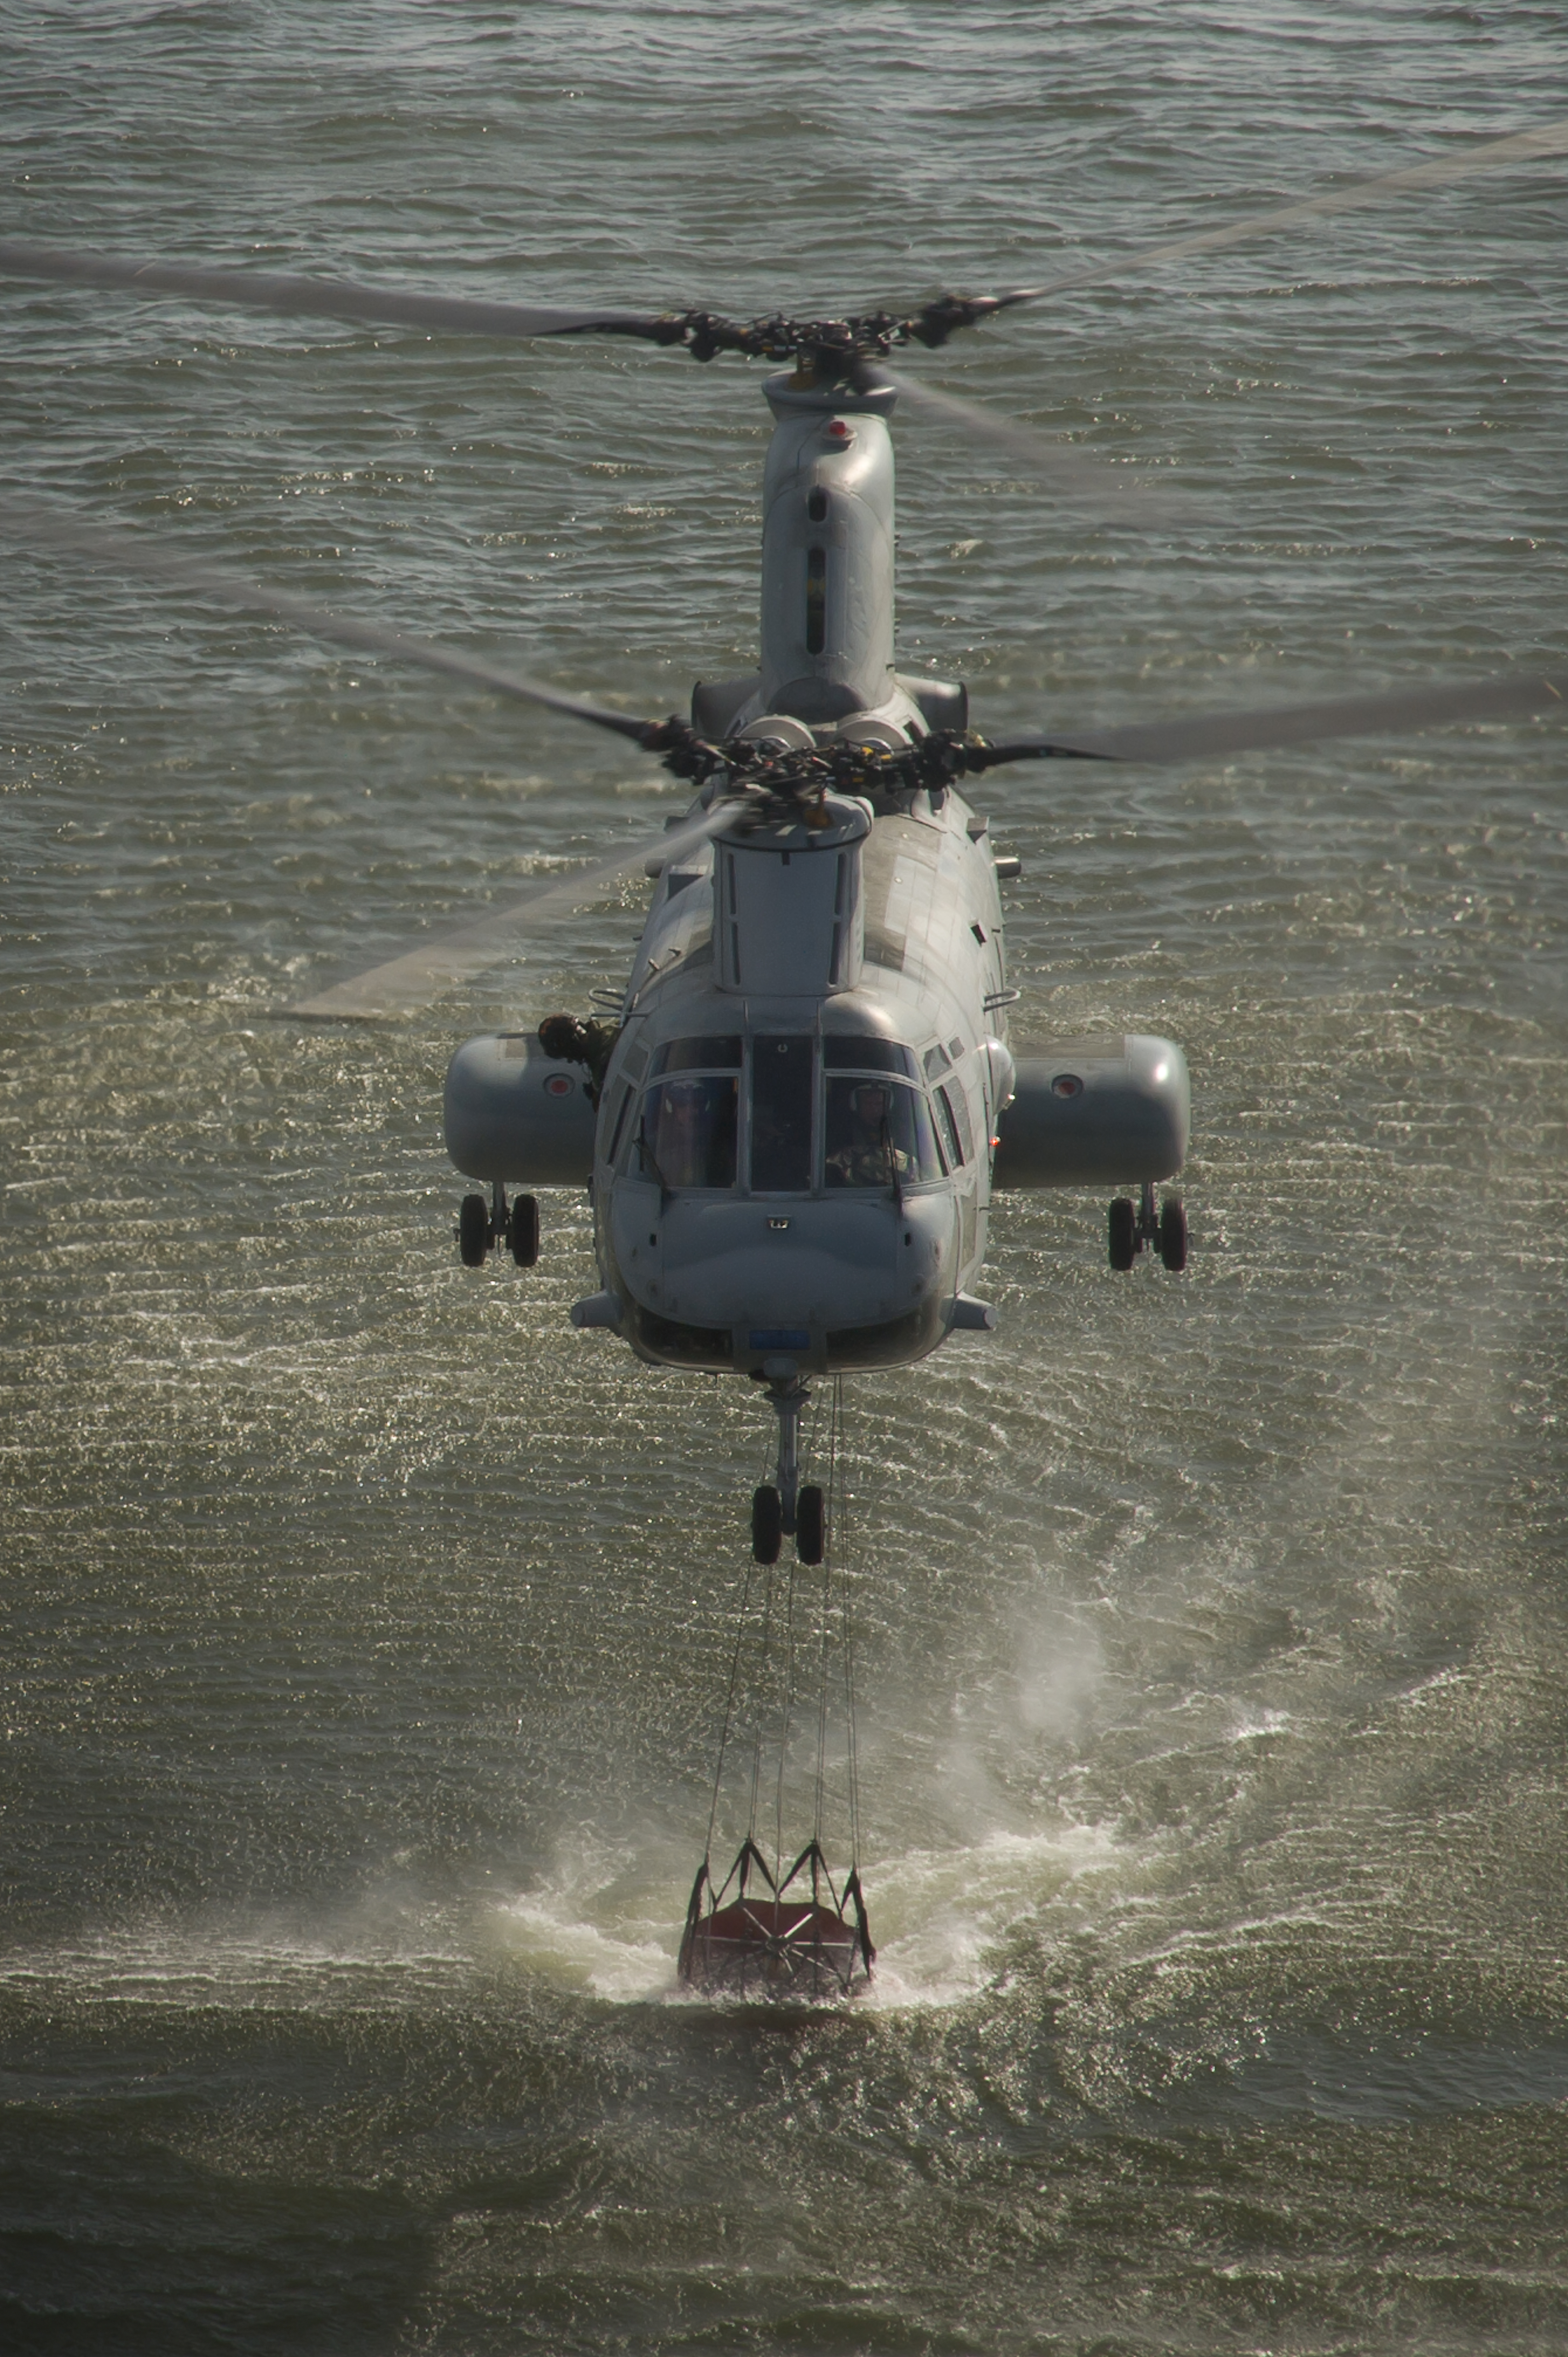 Test team completes final mission on retiring CH-46E helicopter